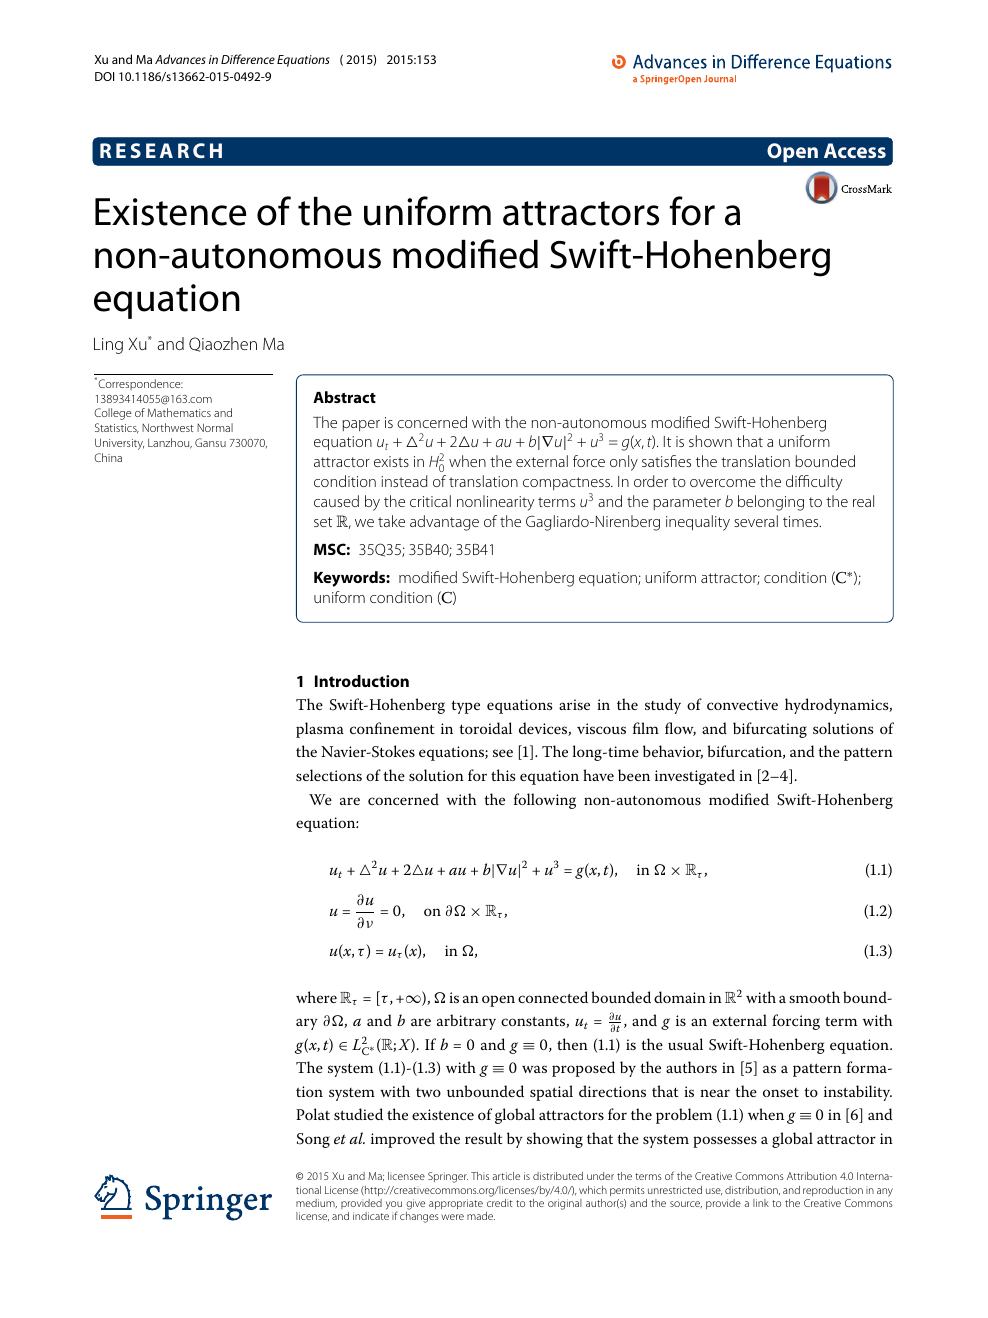 Existence Of The Uniform Attractors For A Non Autonomous Modified Swift Hohenberg Equation Topic Of Research Paper In Mathematics Download Scholarly Article Pdf And Read For Free On Cyberleninka Open Science Hub